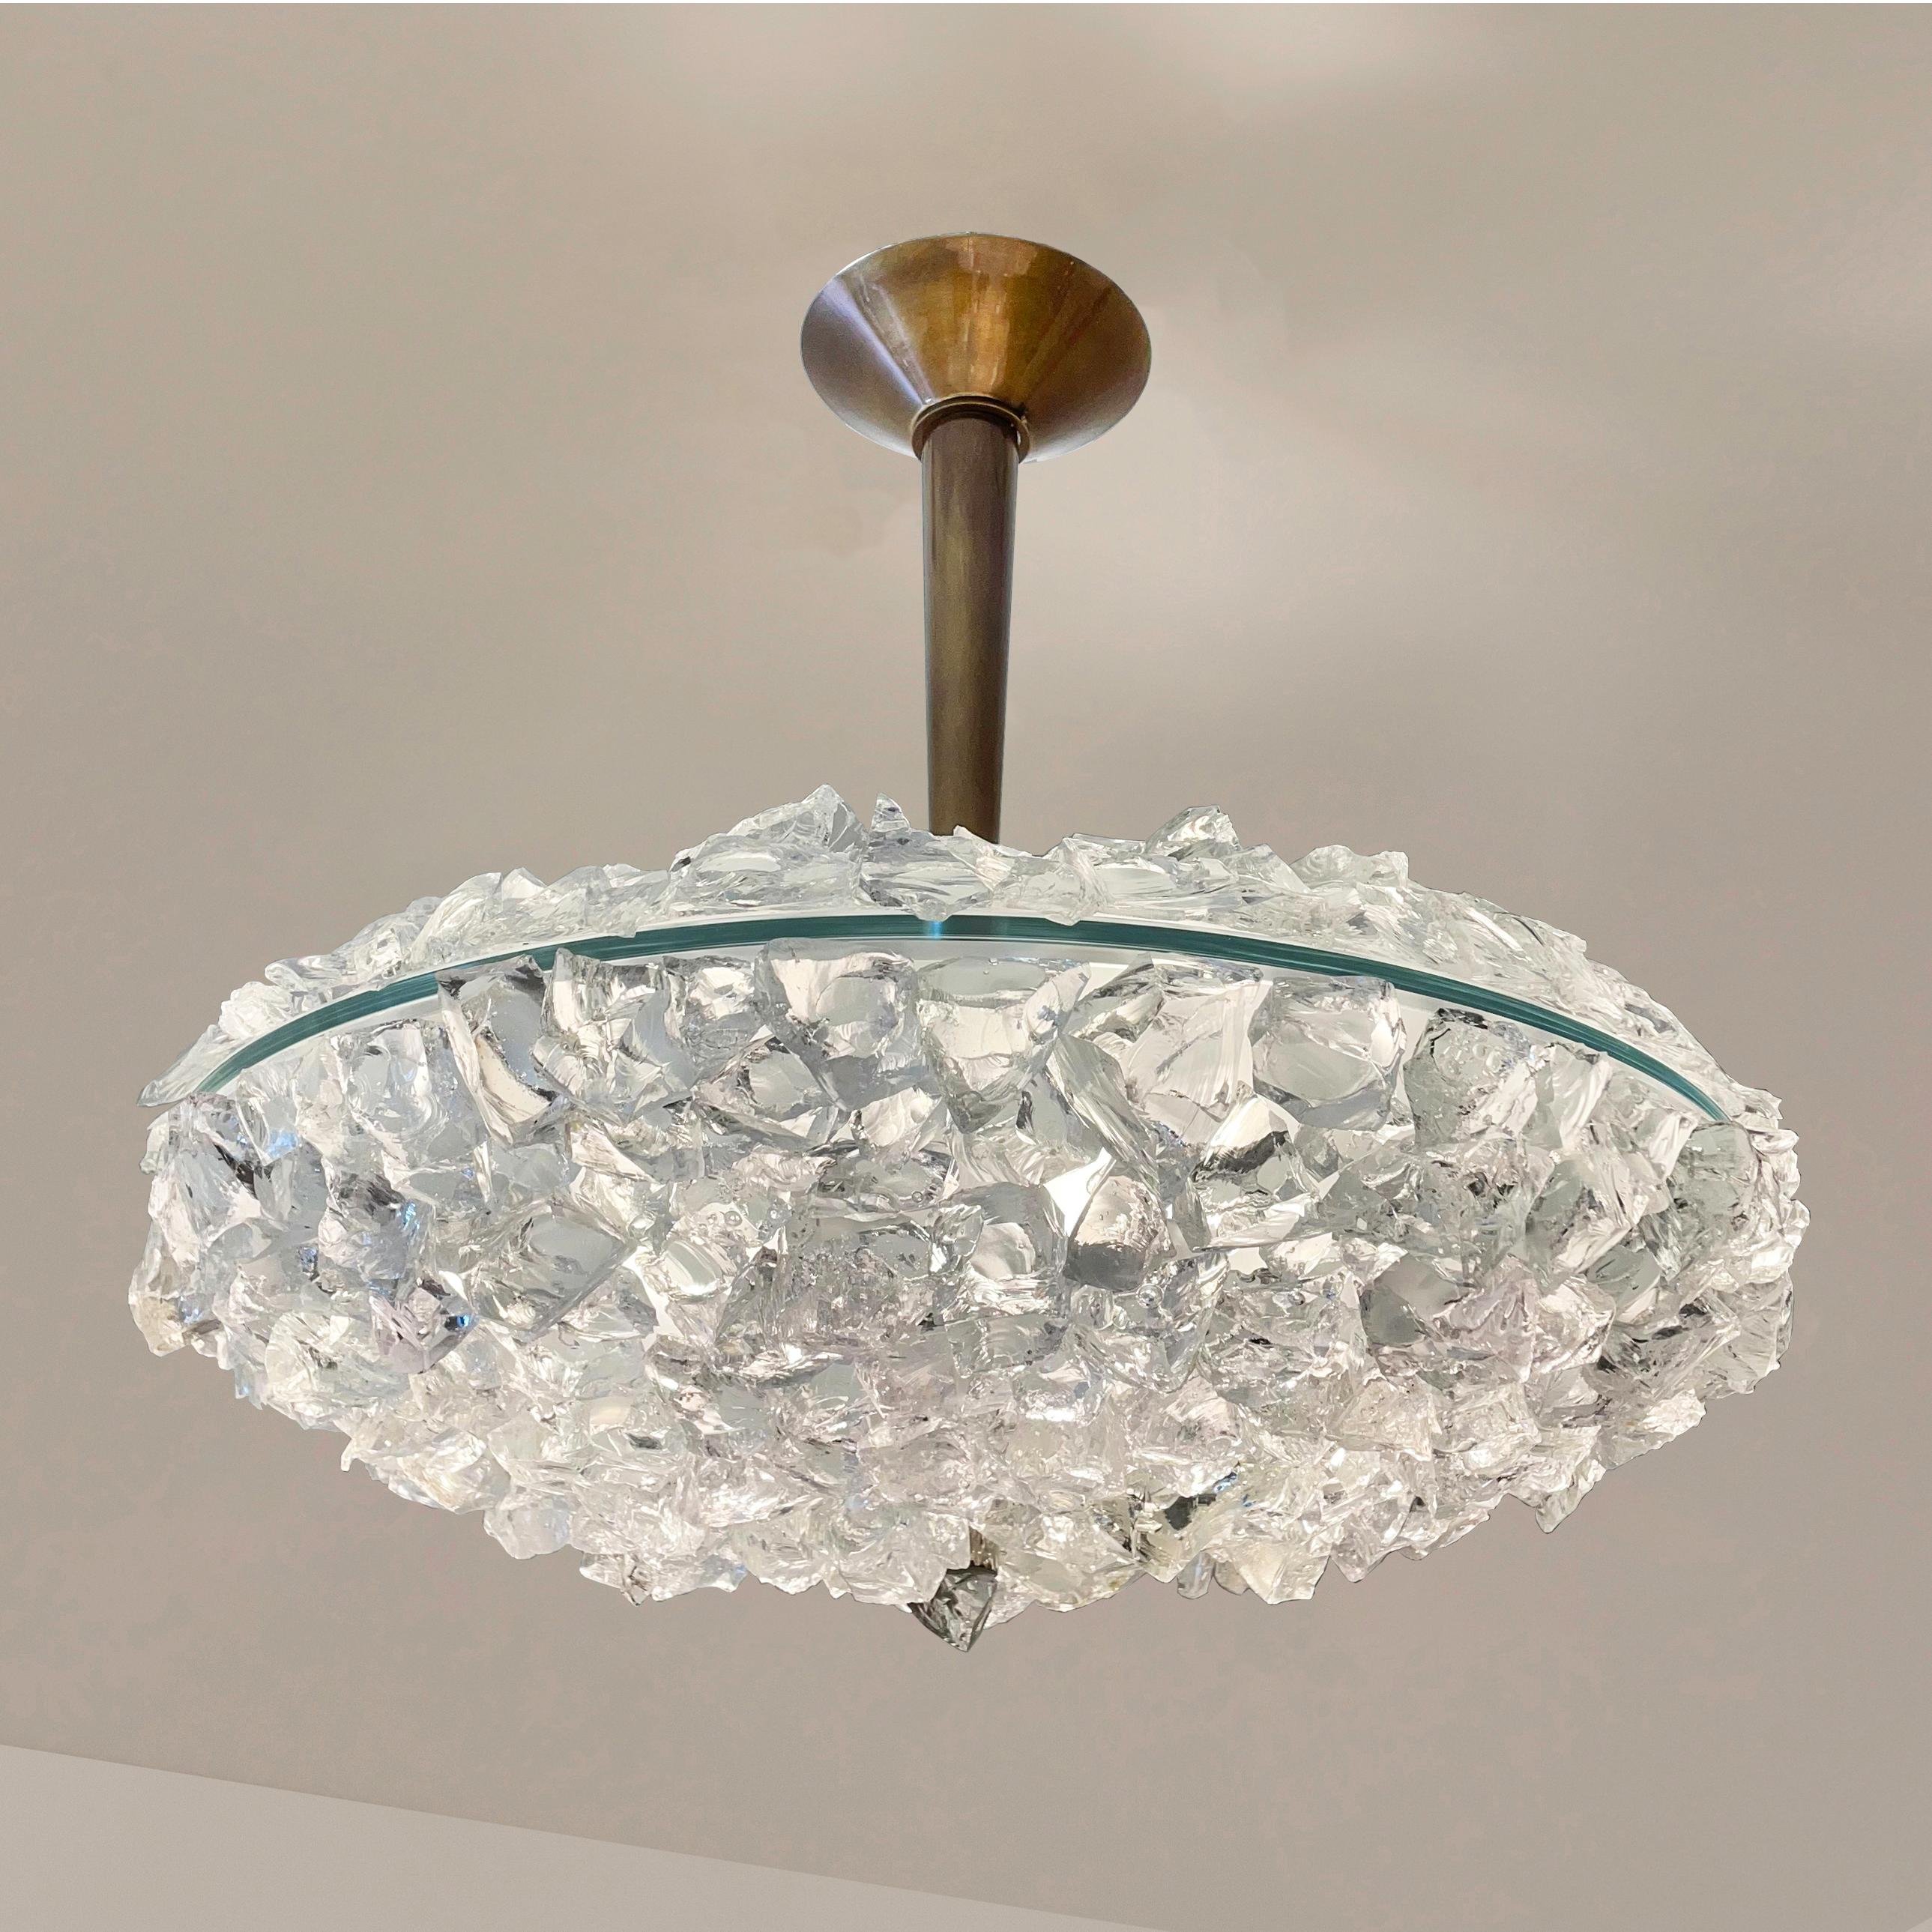 Matera Grande Ceiling Light by Gaspare Asaro-Polished Nickel Finish In New Condition For Sale In New York, NY